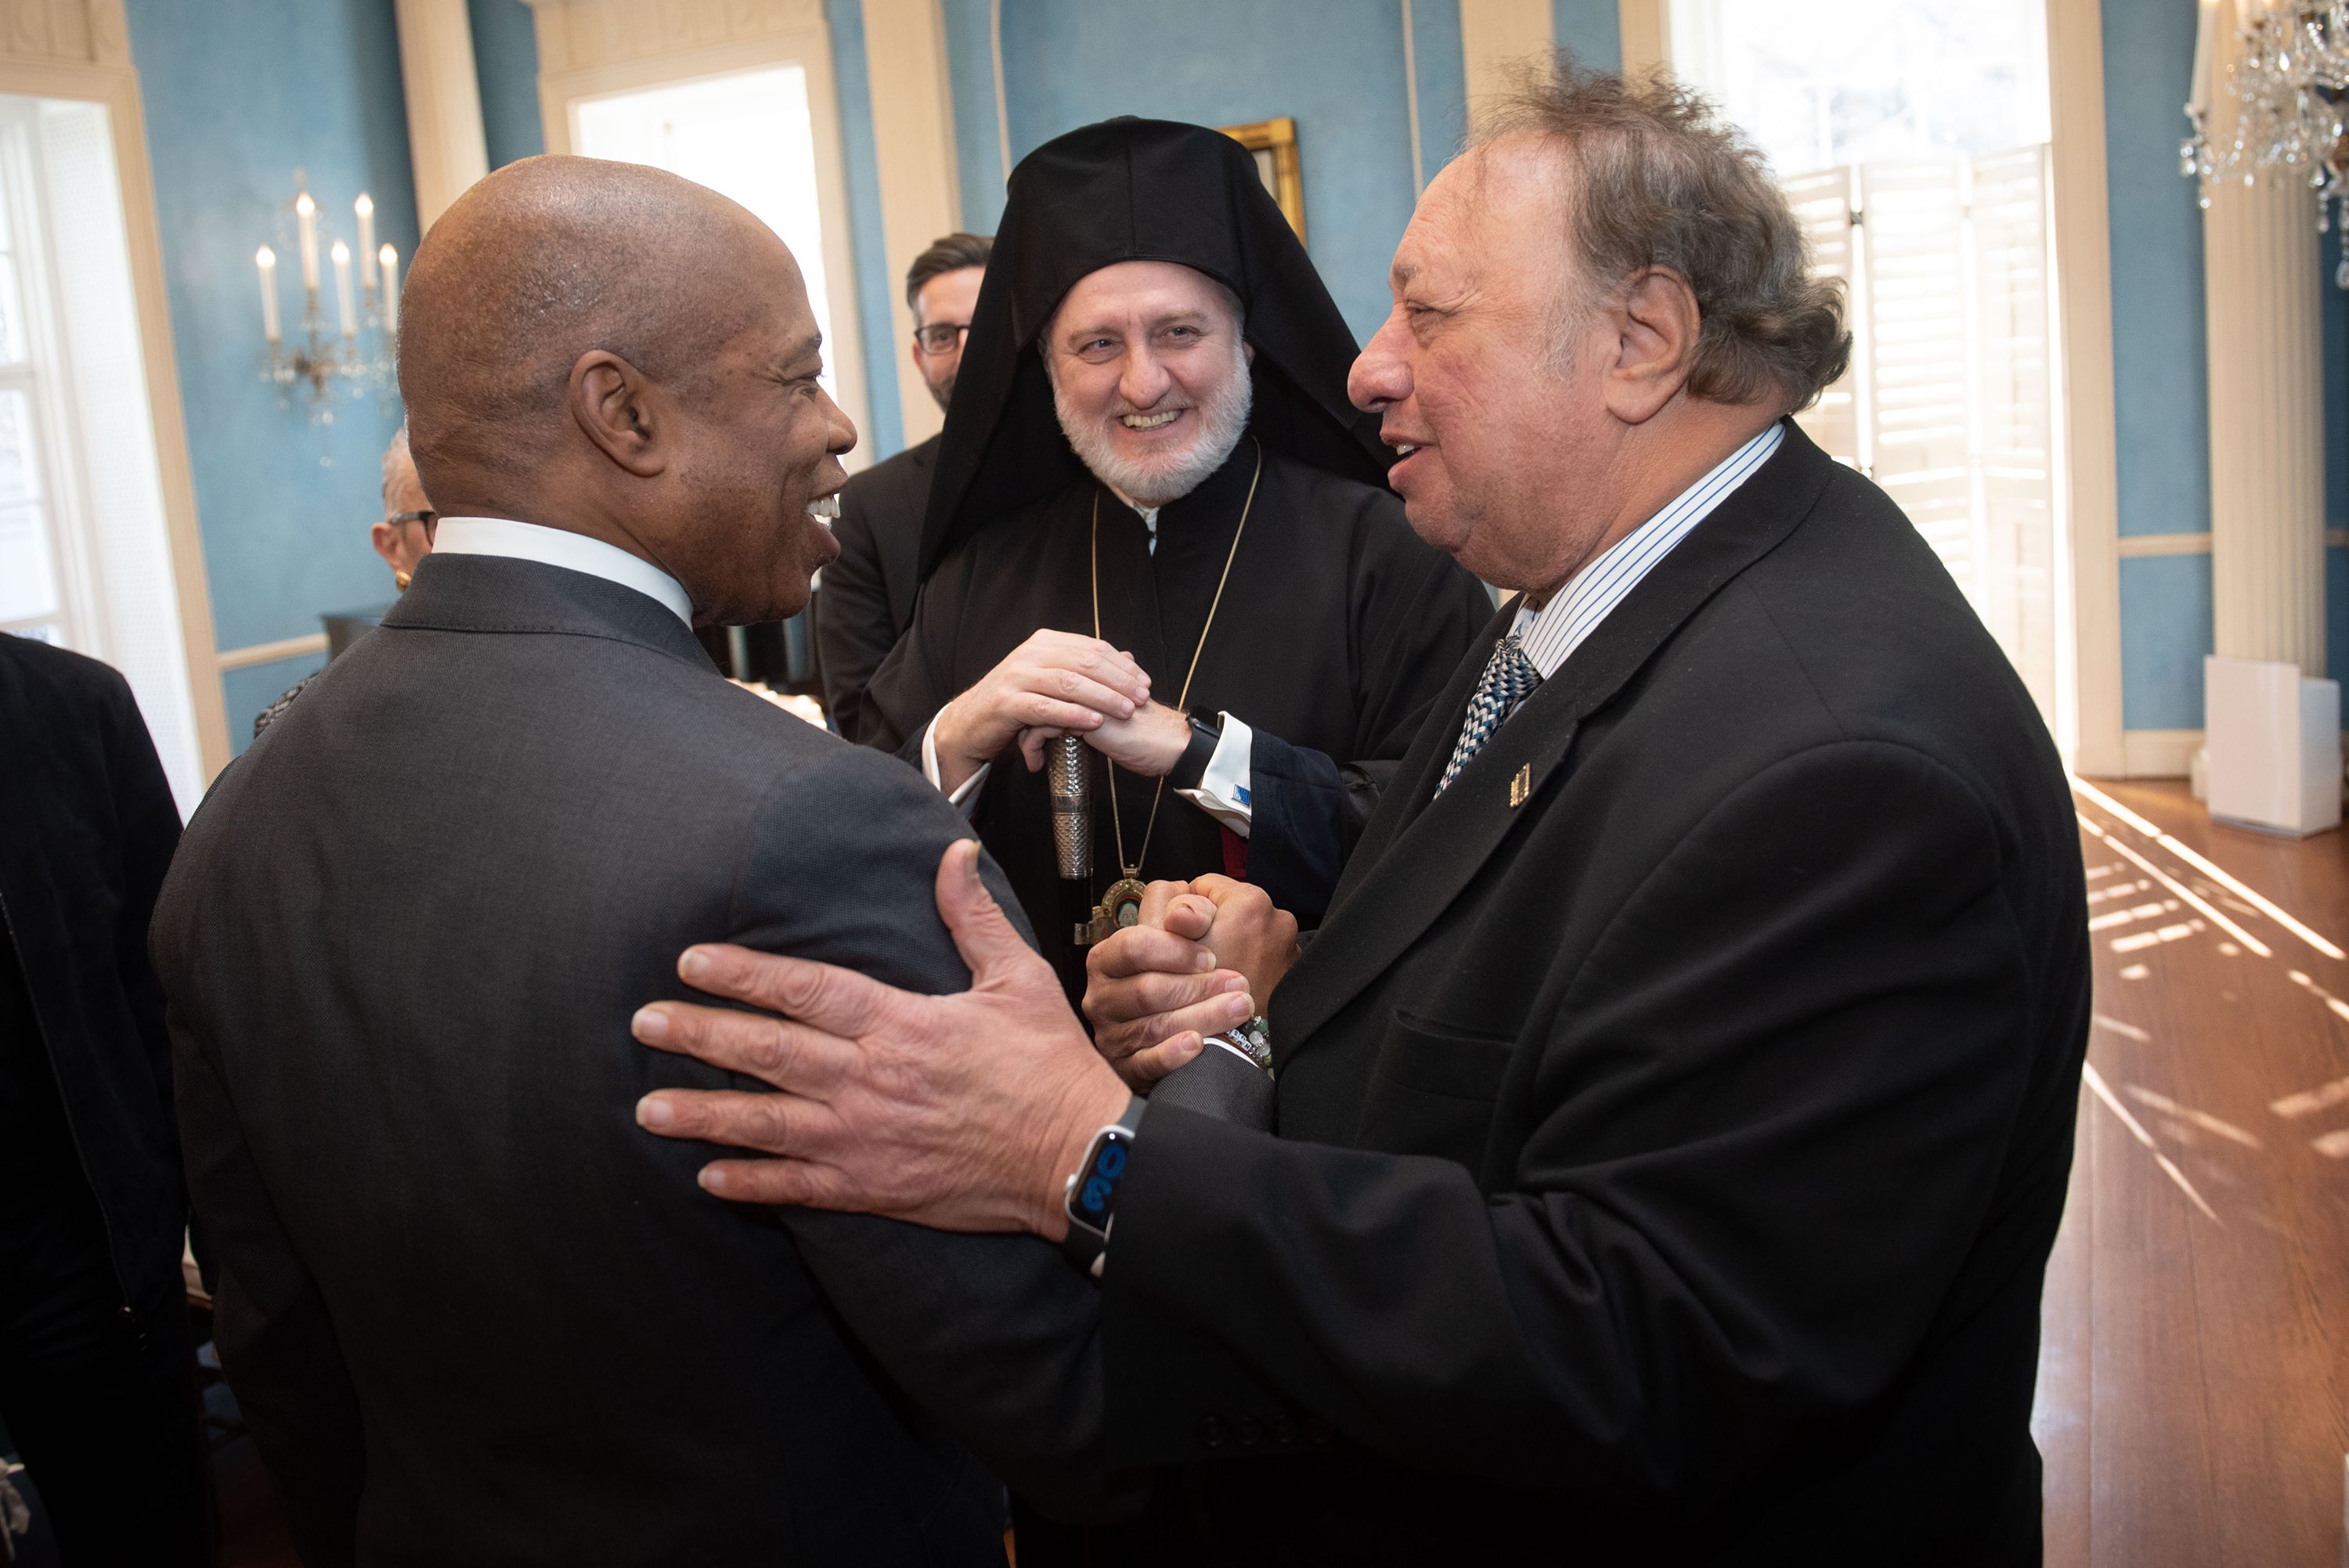 Mayor Eric Adams meets with Greek American leaders at Gracie Mansion on Tuesday, February 15, 2022.